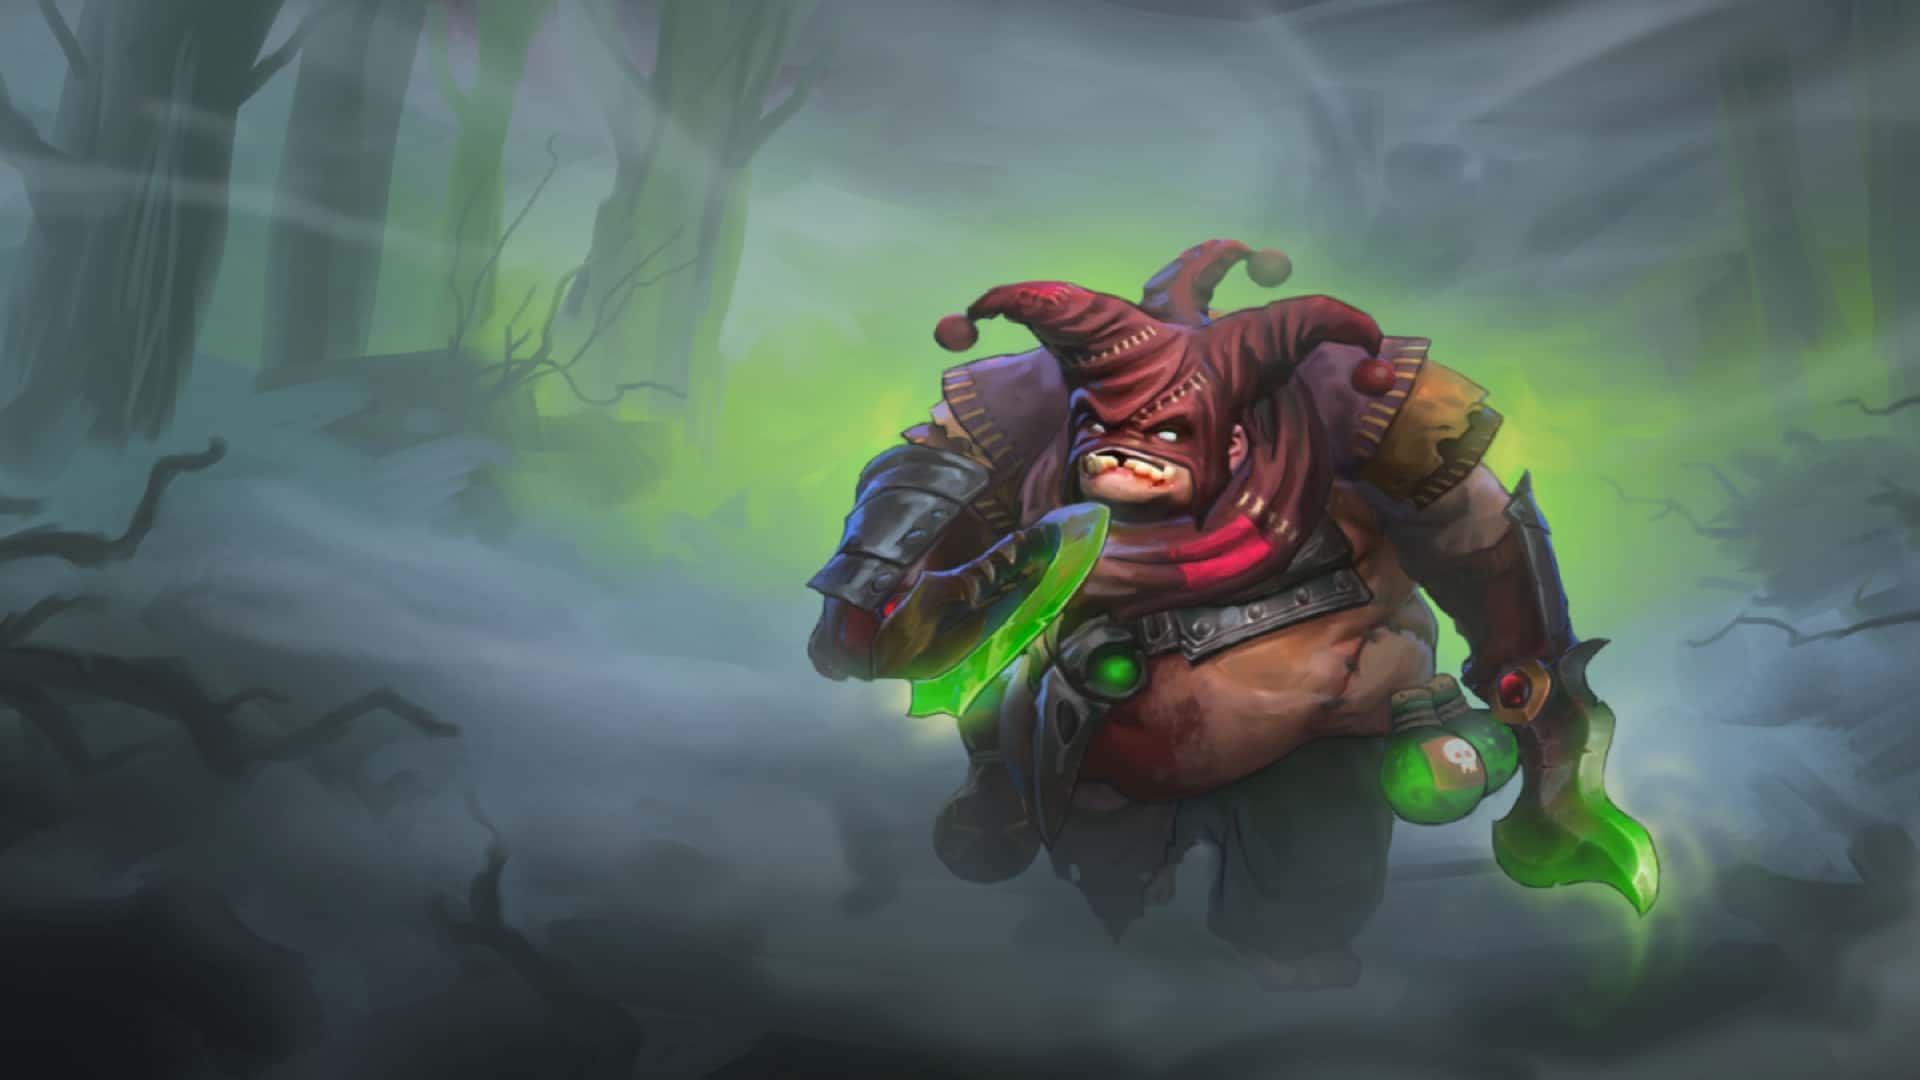 Pudge roams the map for easy kills using Meat Hook